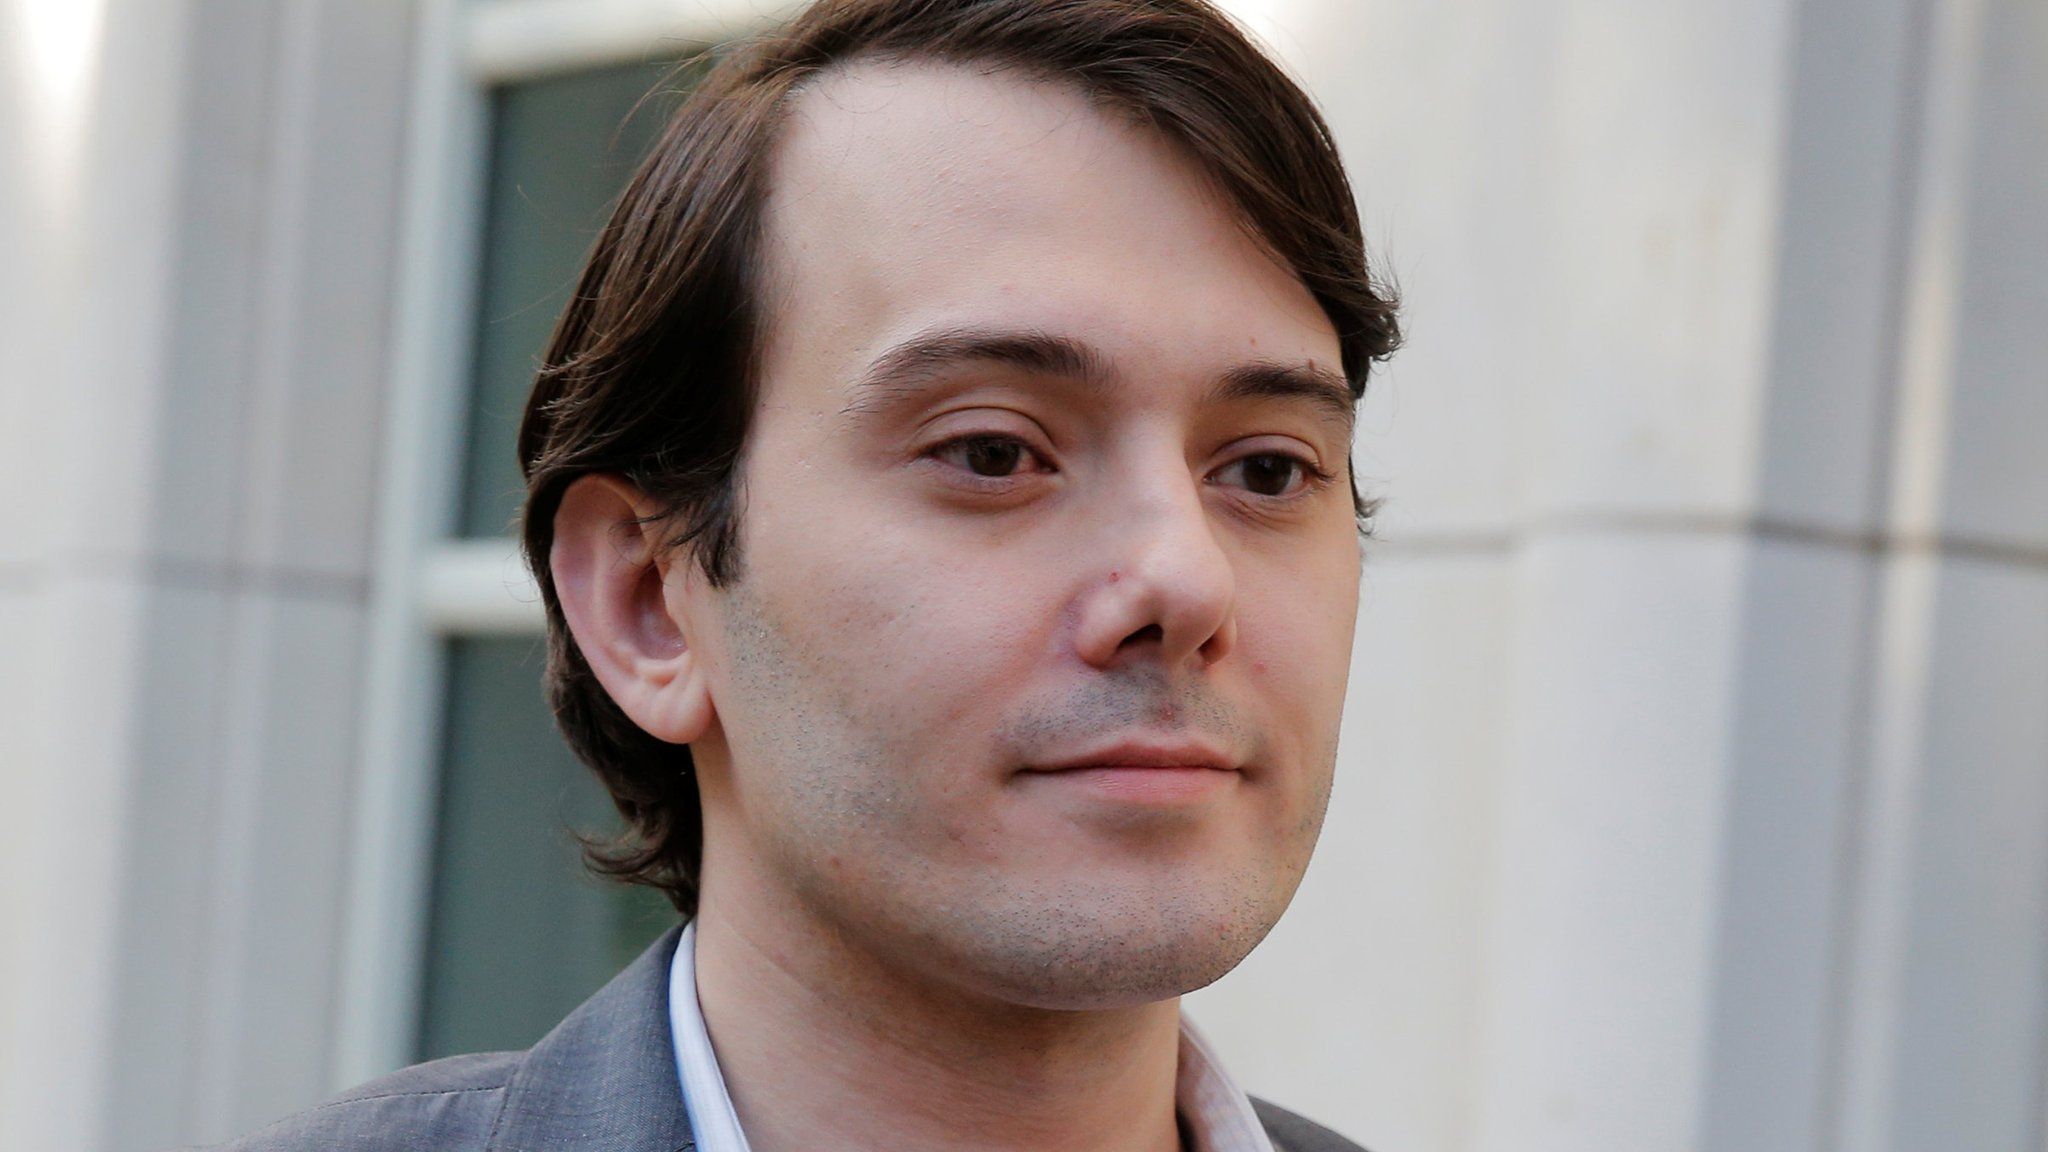 Martin Shkreli attends a hearing at US Federal Court in Brooklyn, New York, June 26, 2017